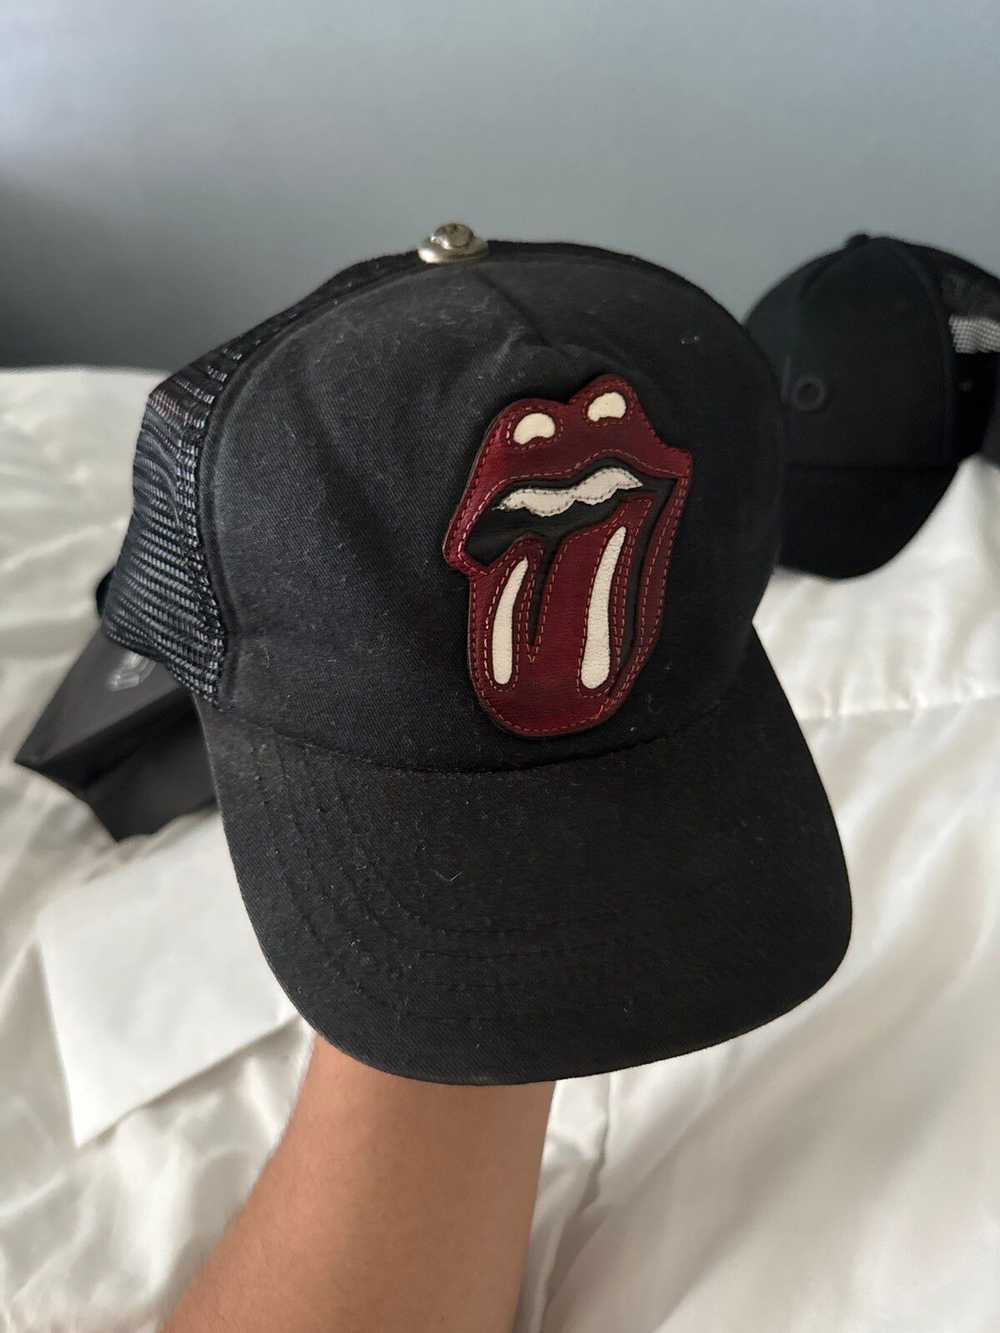 Chrome Hearts Chrome hearts Rolling Stones hat - image 2